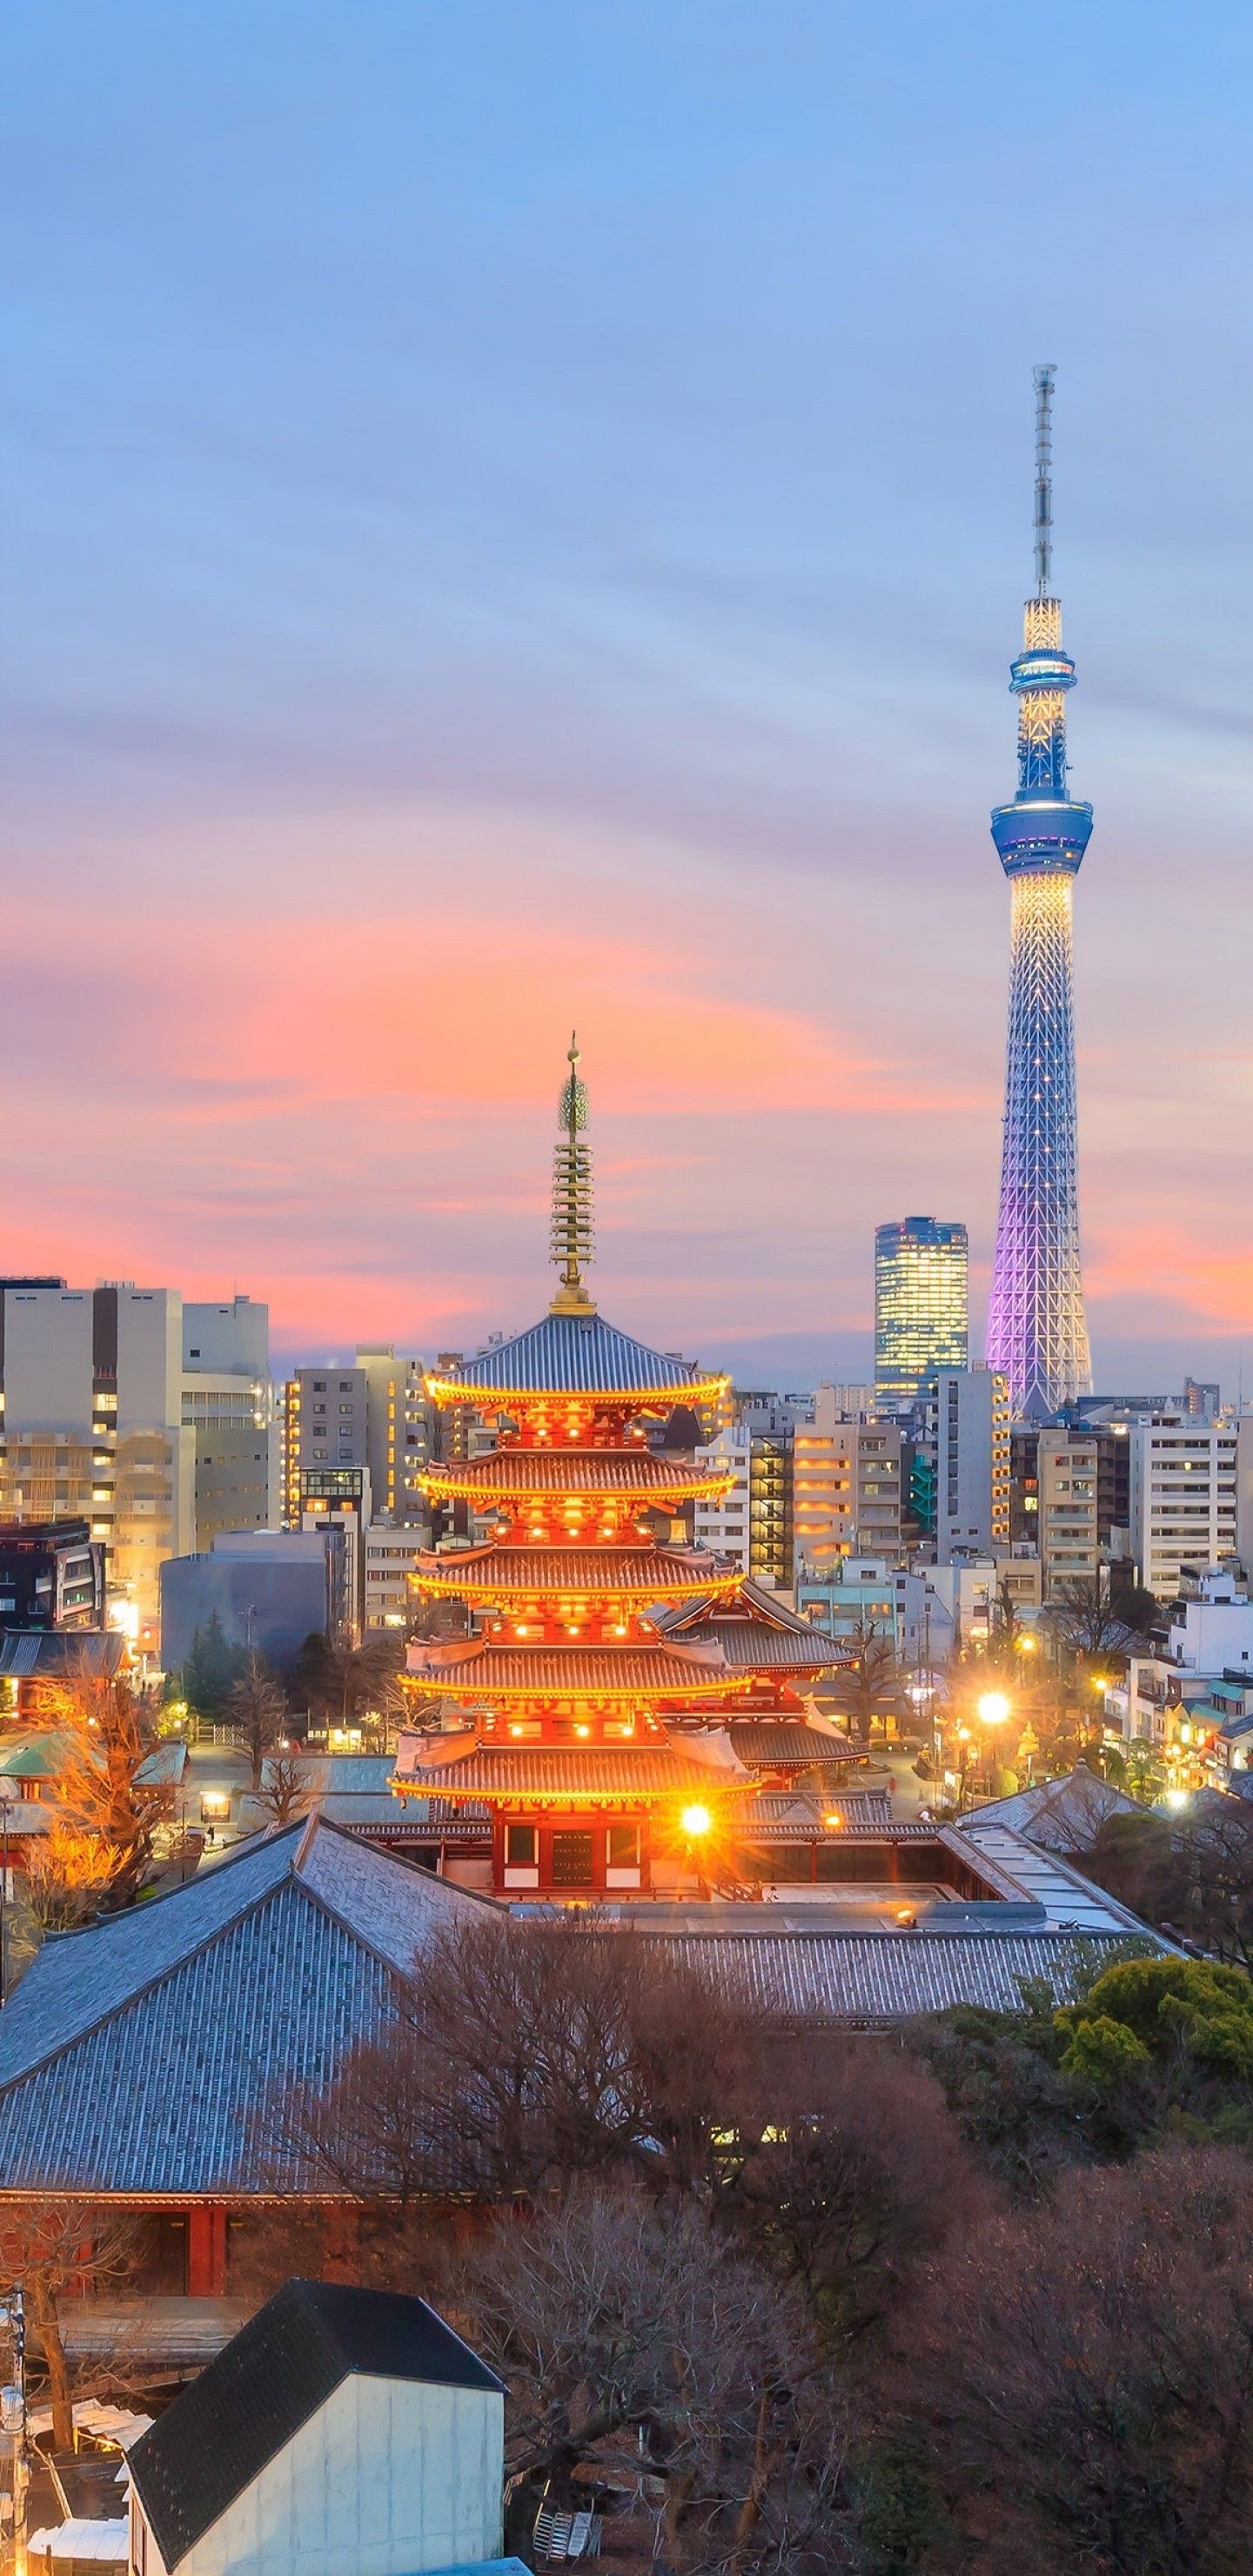 Download 1440x2960 Japan Tokyo, Skyline, Clouds, Sunset, Buildings Wallpaper for Samsung Galaxy S Note S S8+, Google Pixel 3 XL